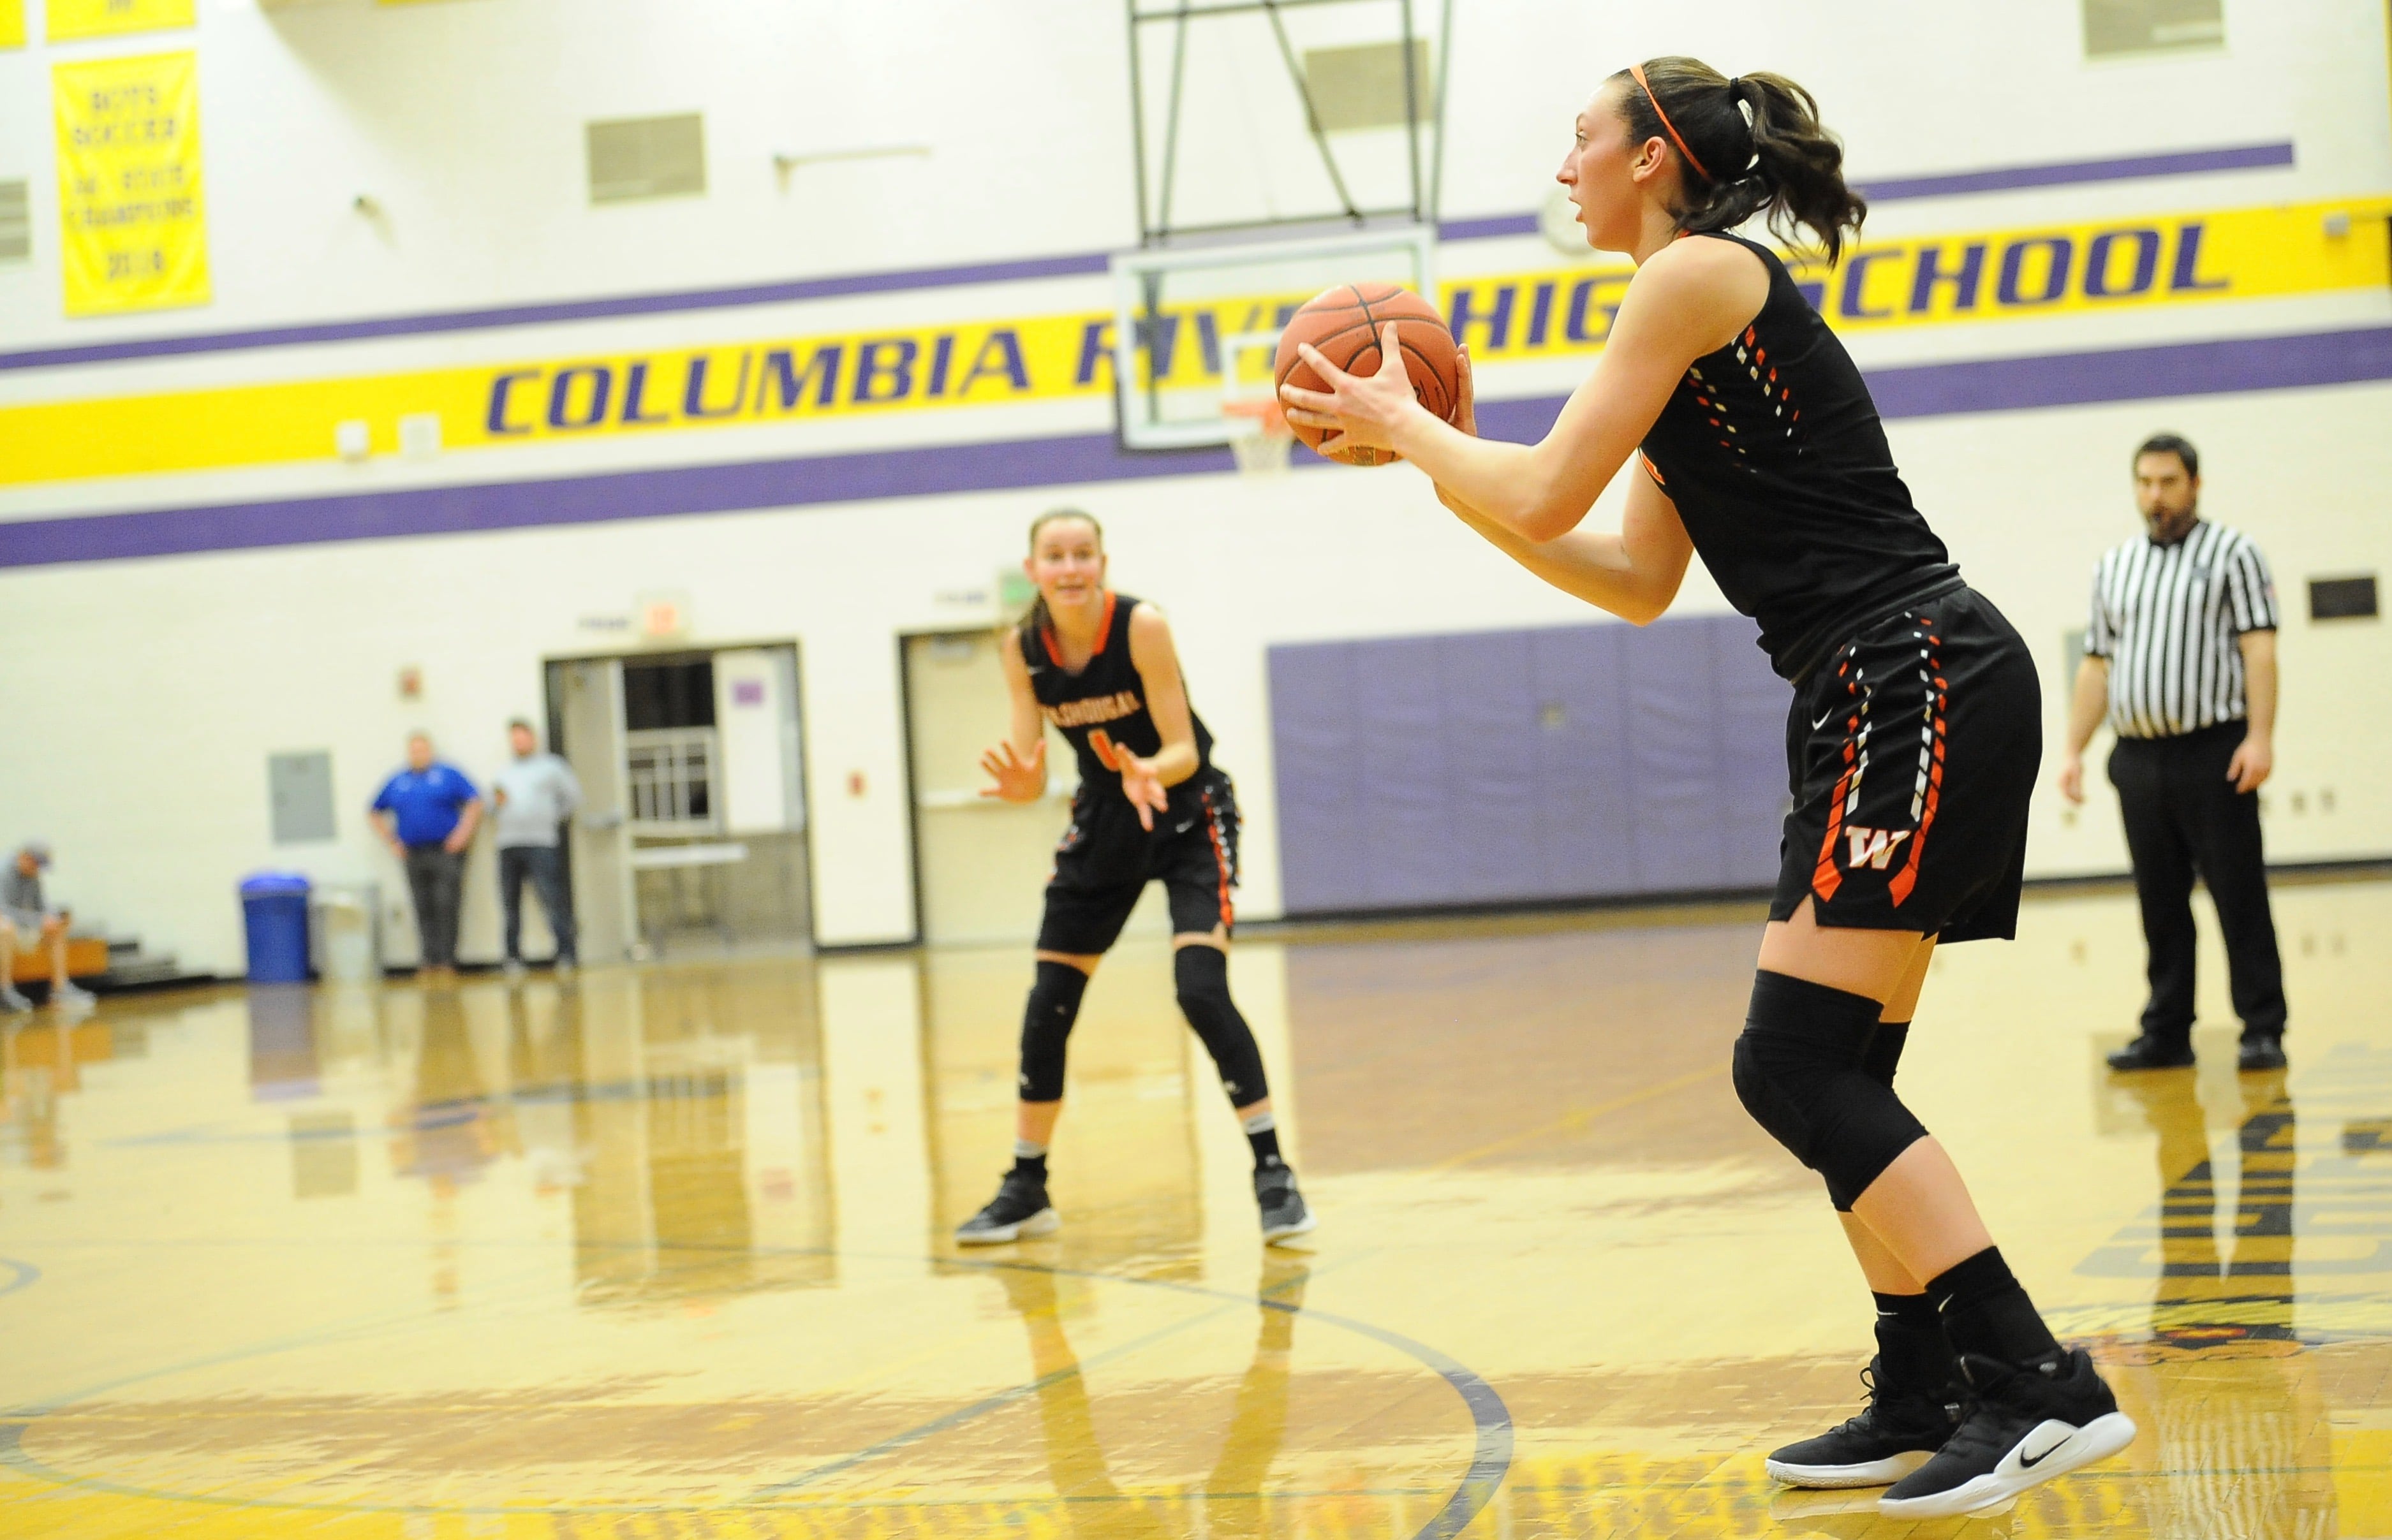 Beyonce Bea (right) readies to shoot a corner 3-pointer as Jaiden Bea (1) beckons to her right during Washougal's 50-41 win over Columbia River on Monday night at Columbia River High School.